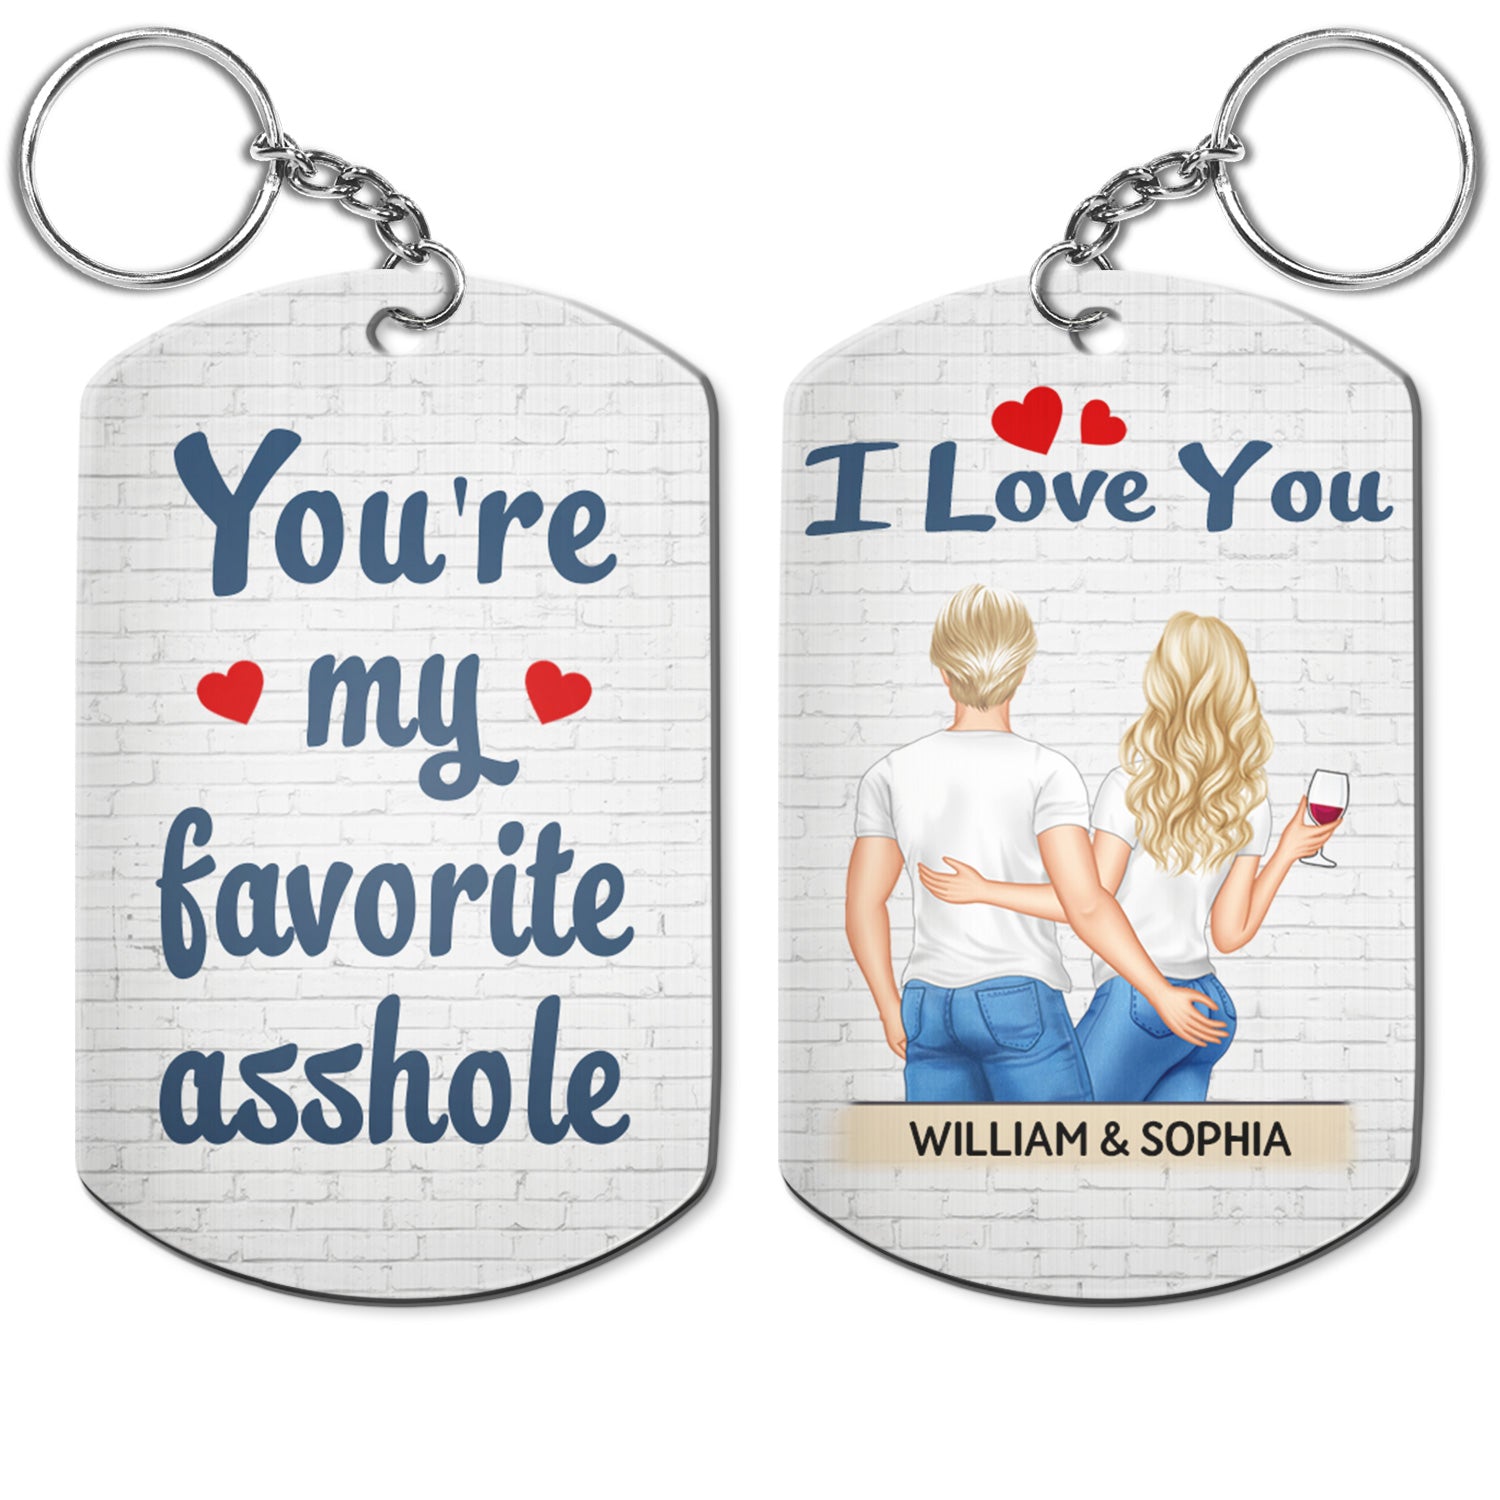 You're My Favorite Backside - Anniversary, Funny Gift For Couples, Family - Personalized Aluminum Keychain